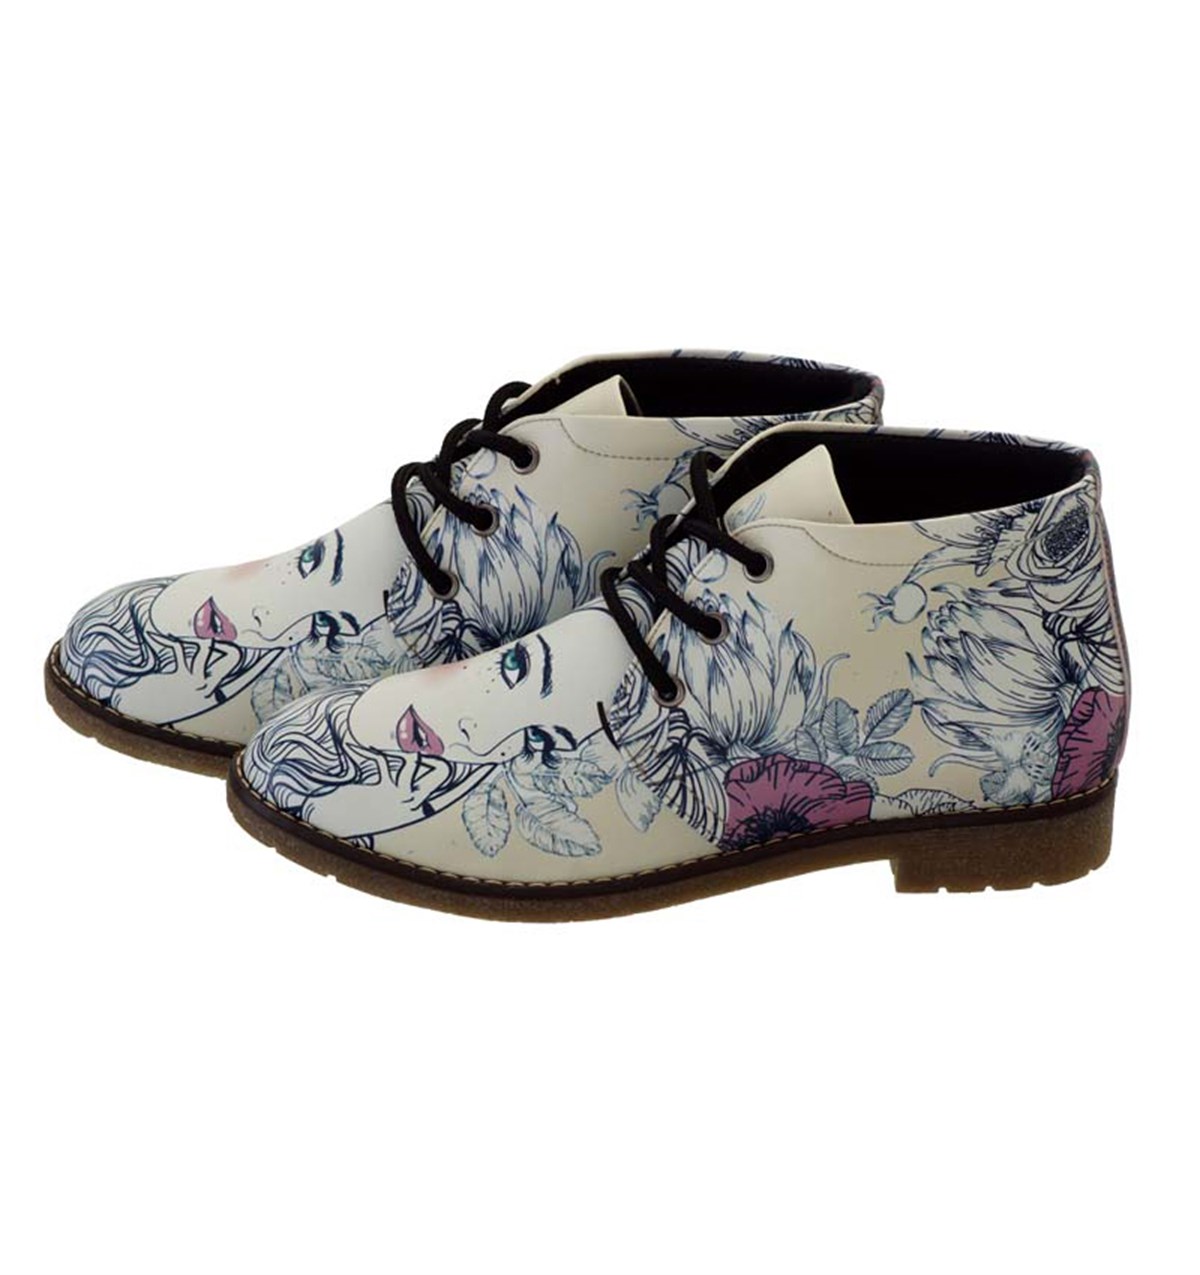 Printed Women's Face Theme Women's Poppy Boots